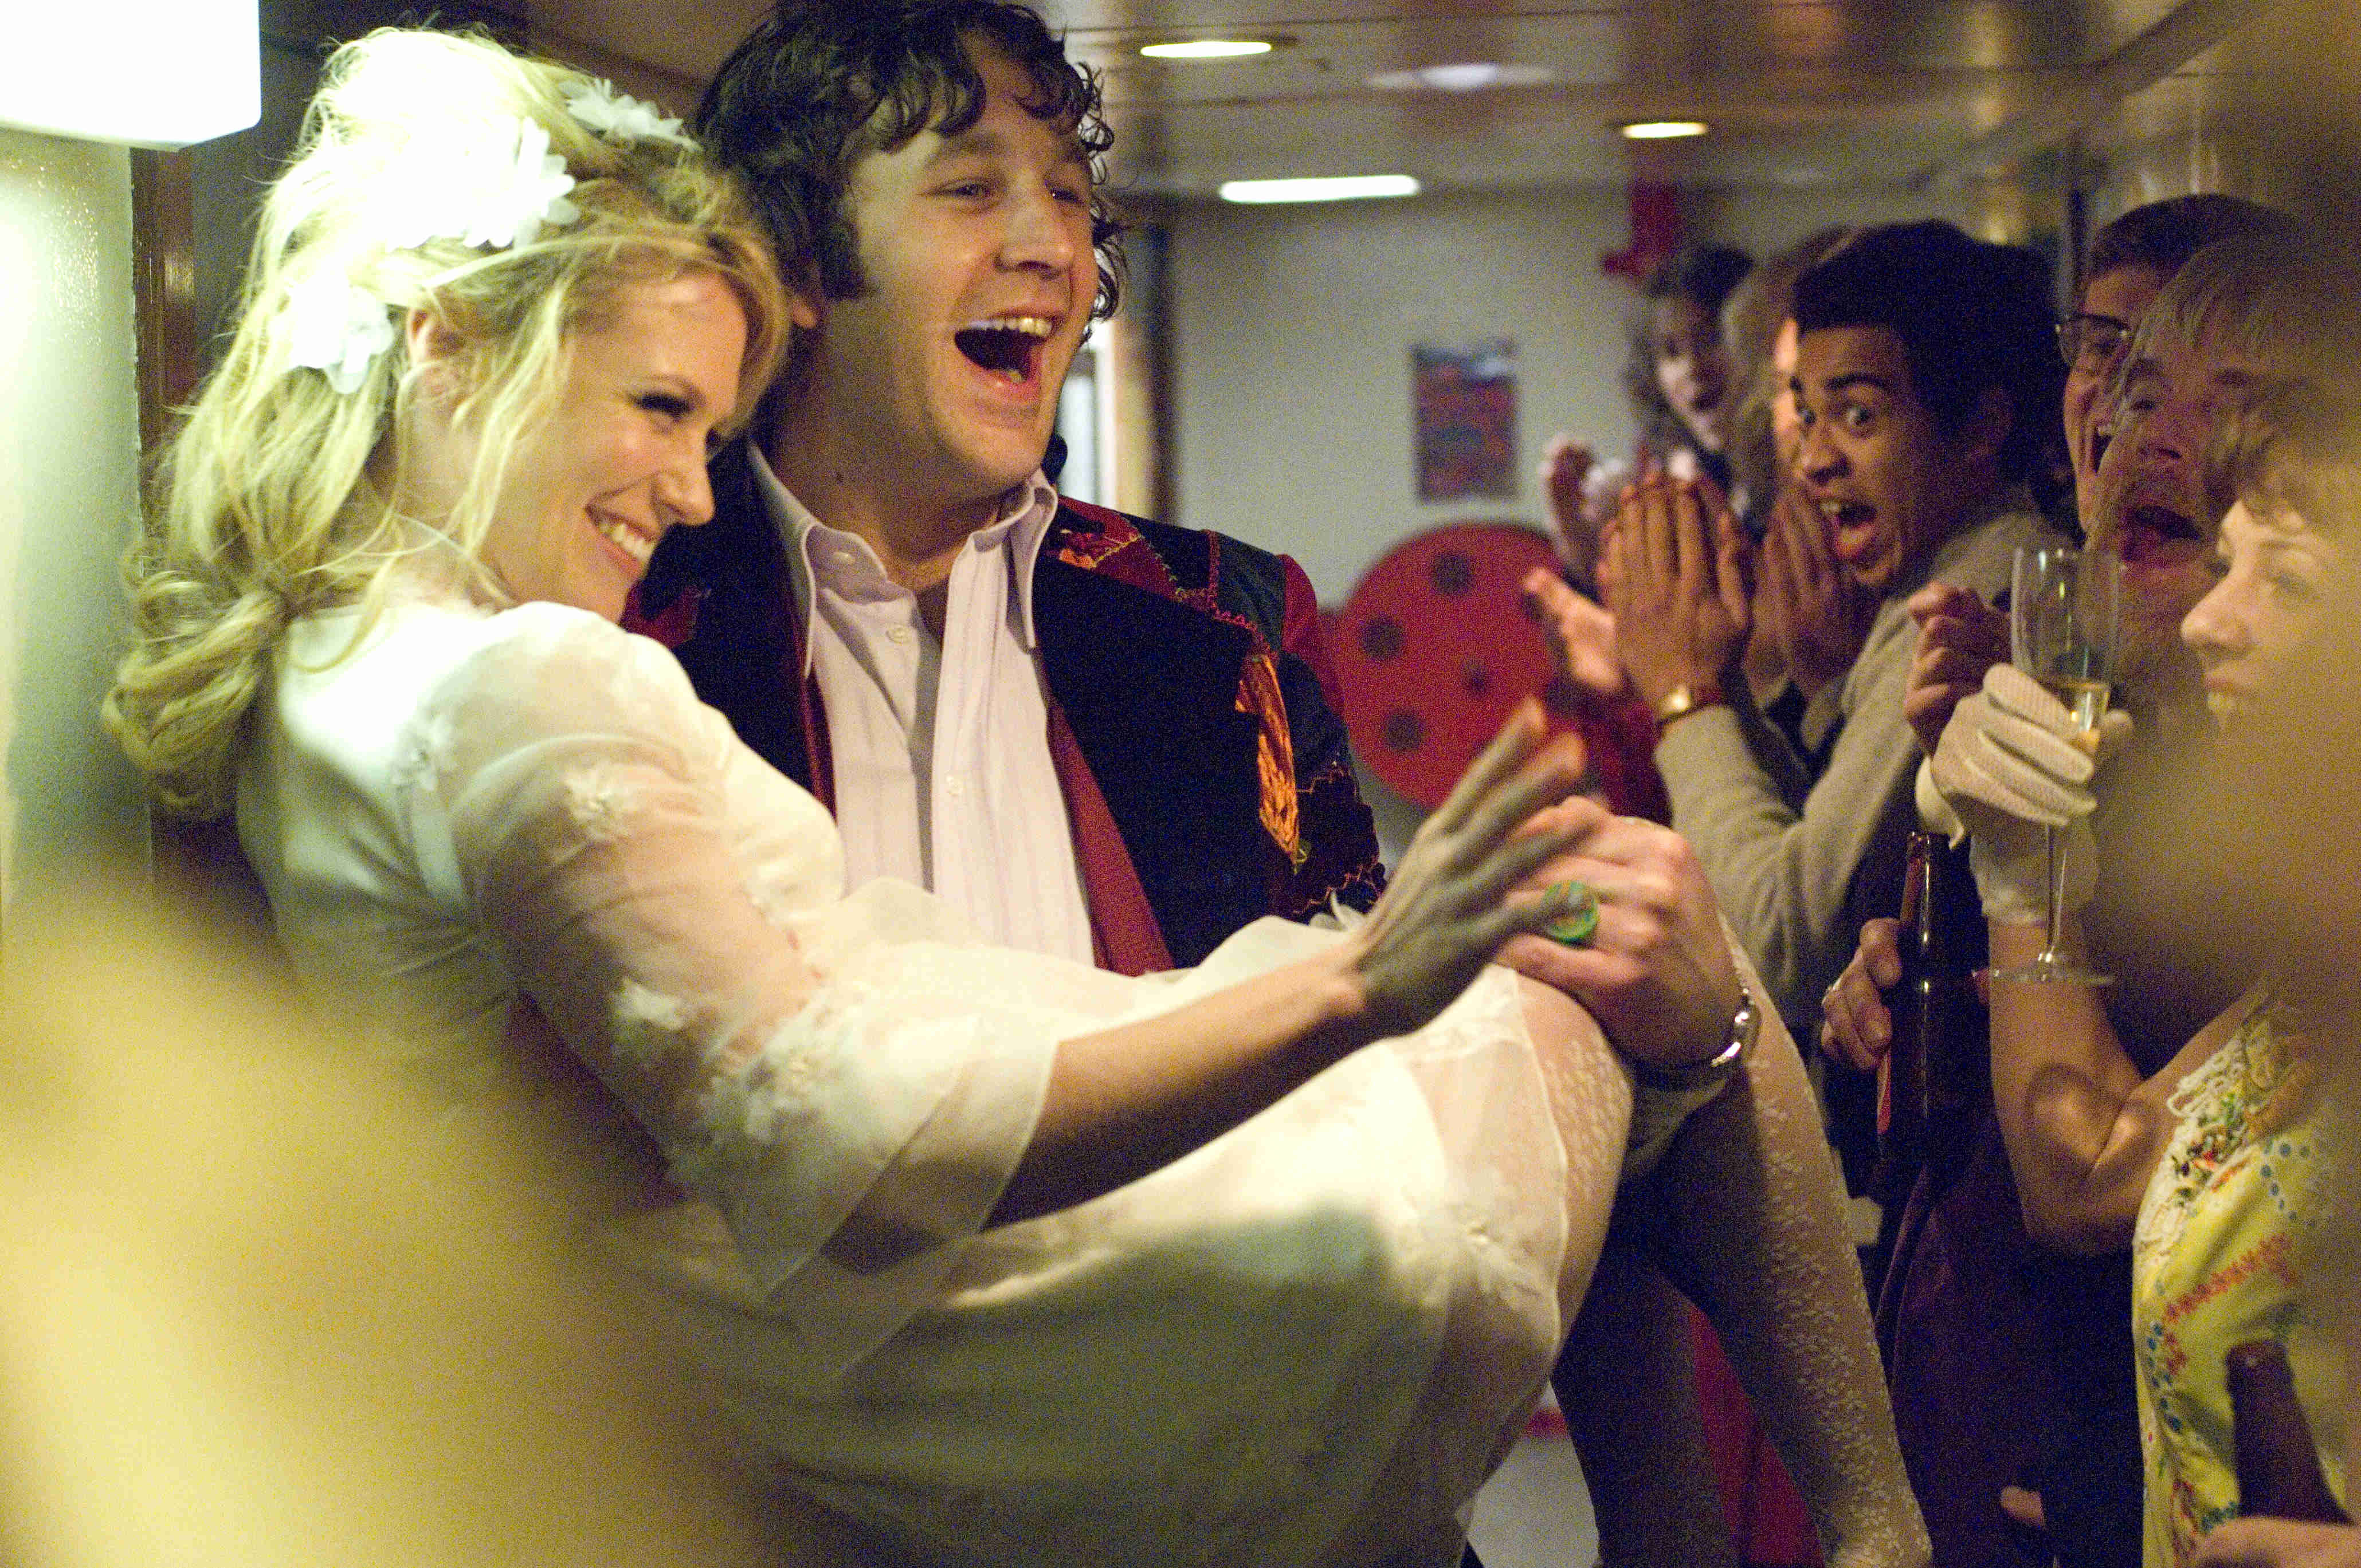 January Jones stars as Eleonore and Chris O'Dowd stars as Simon in Focus Features' Pirate Radio (2009)